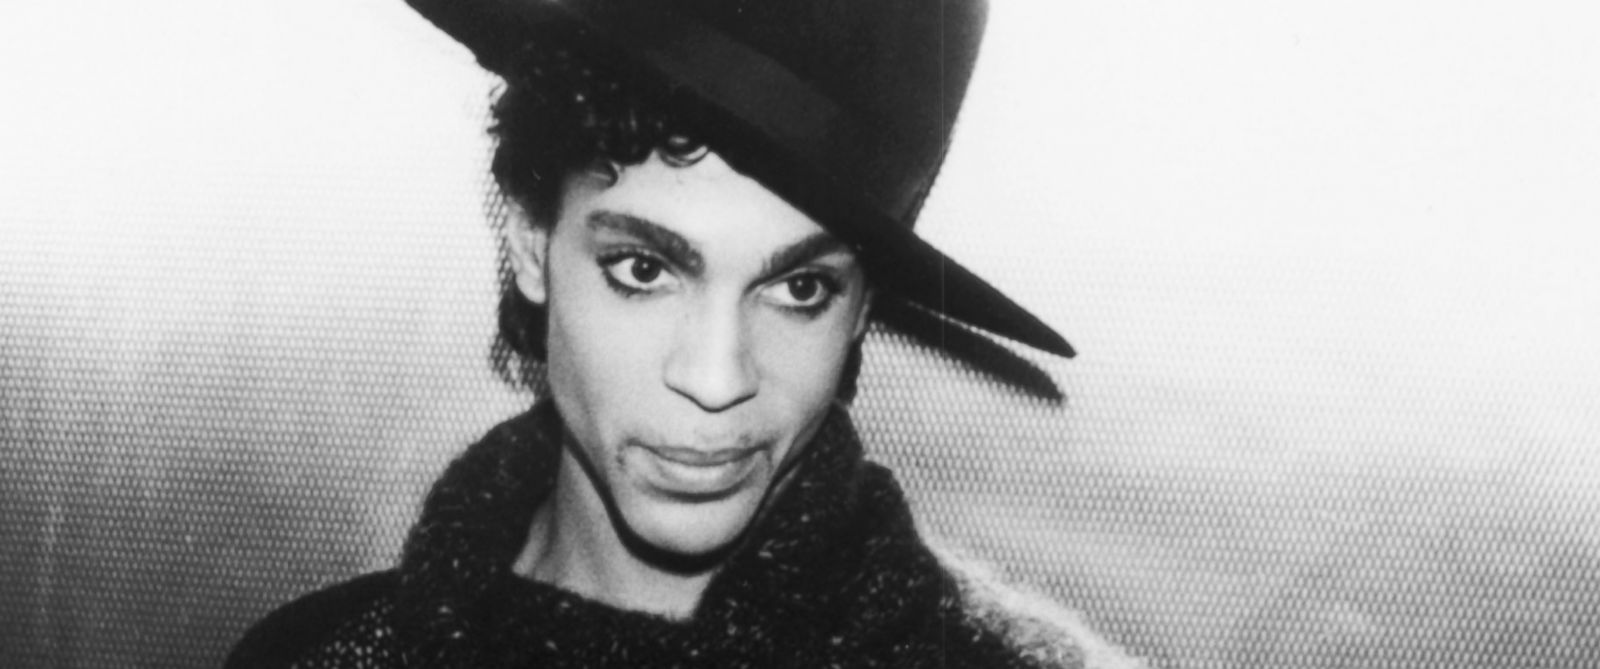 Michael was a definite influence and inspiration for Prince.